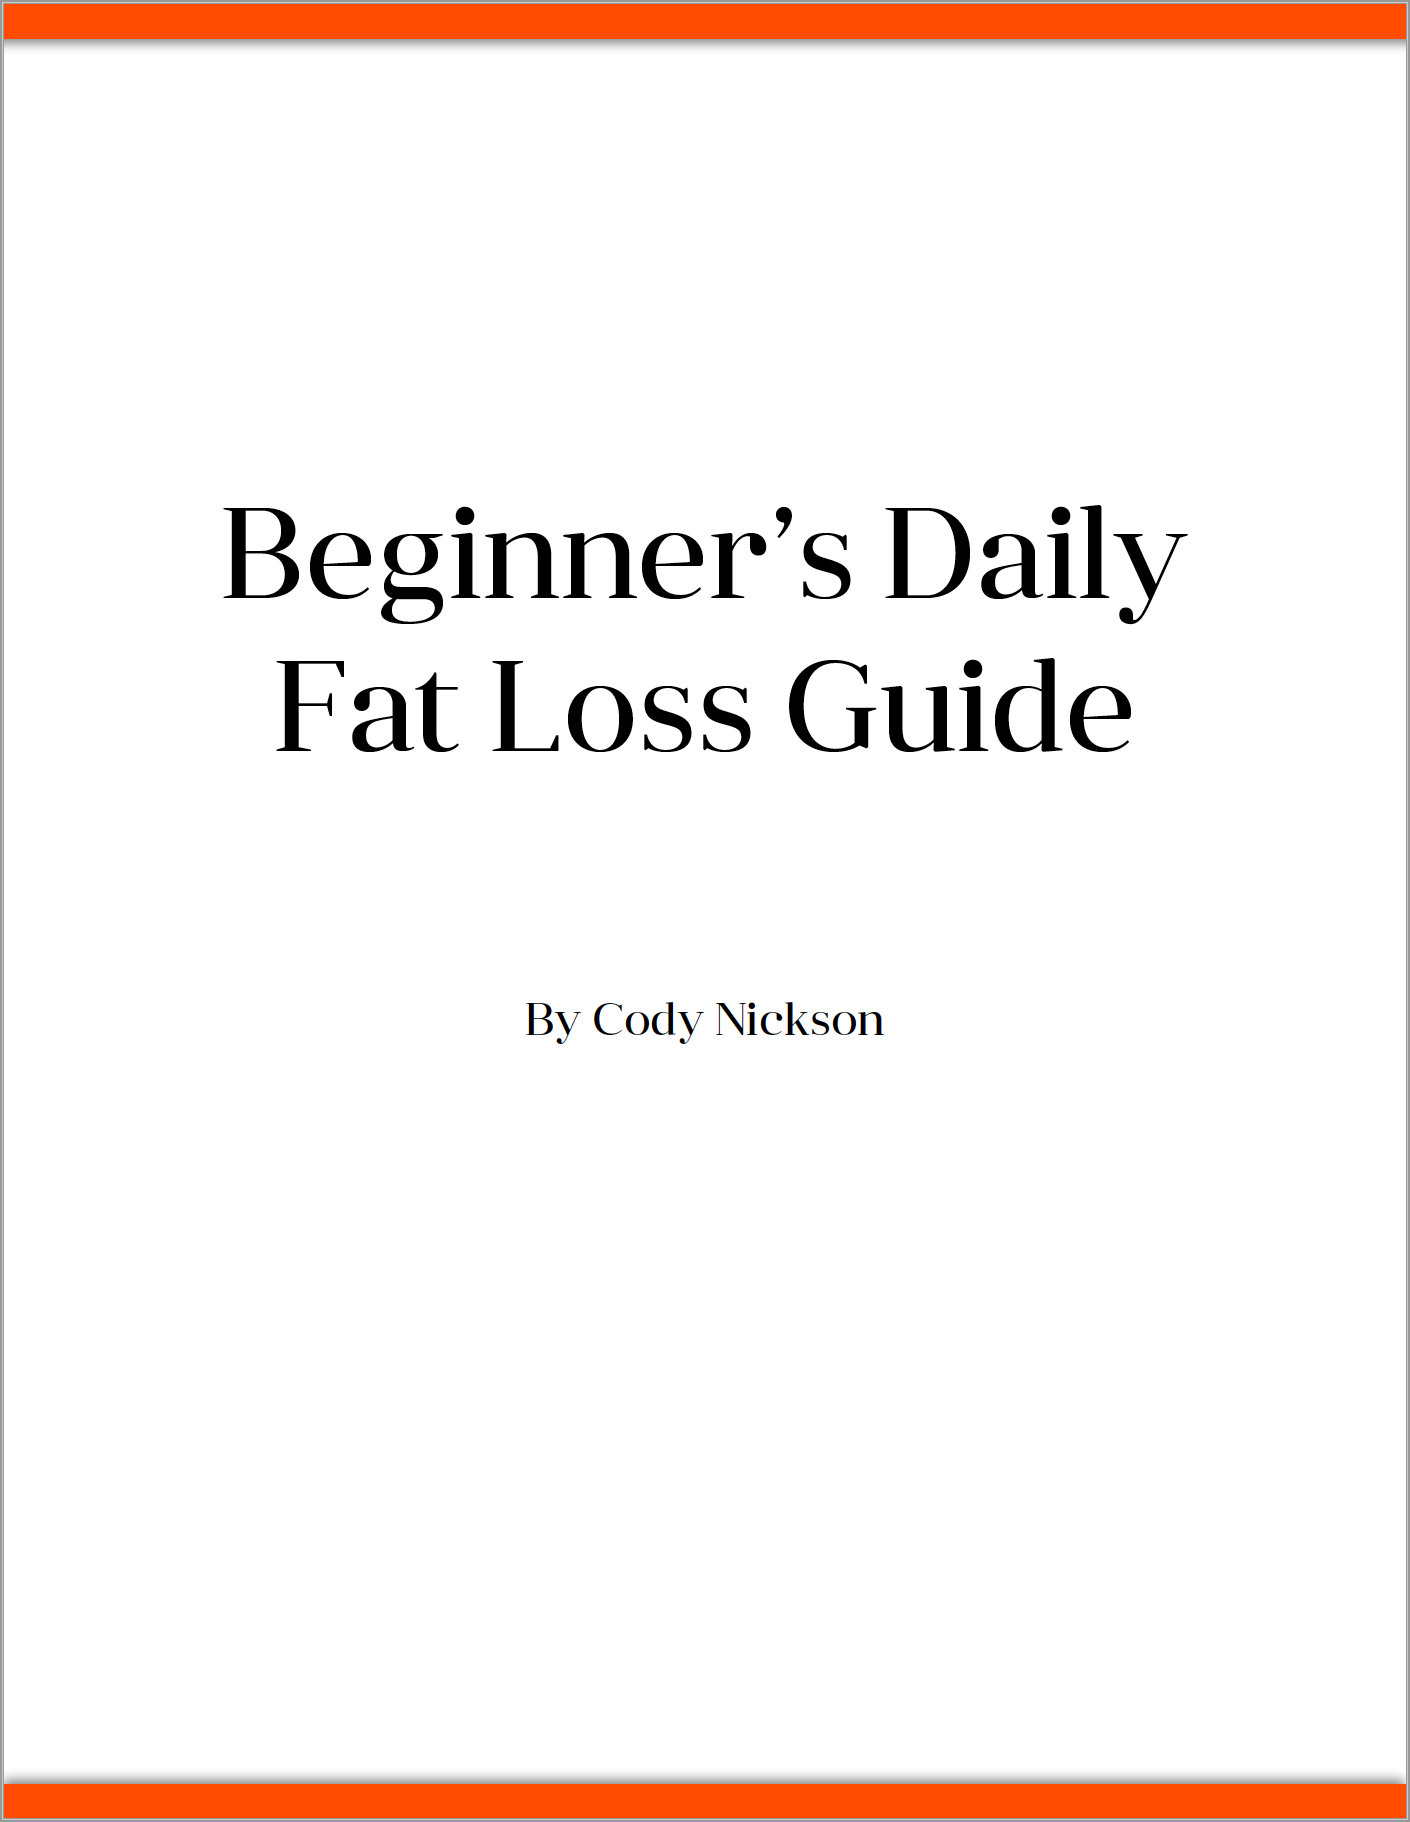 Beginner's Daily Fat Loss Guide